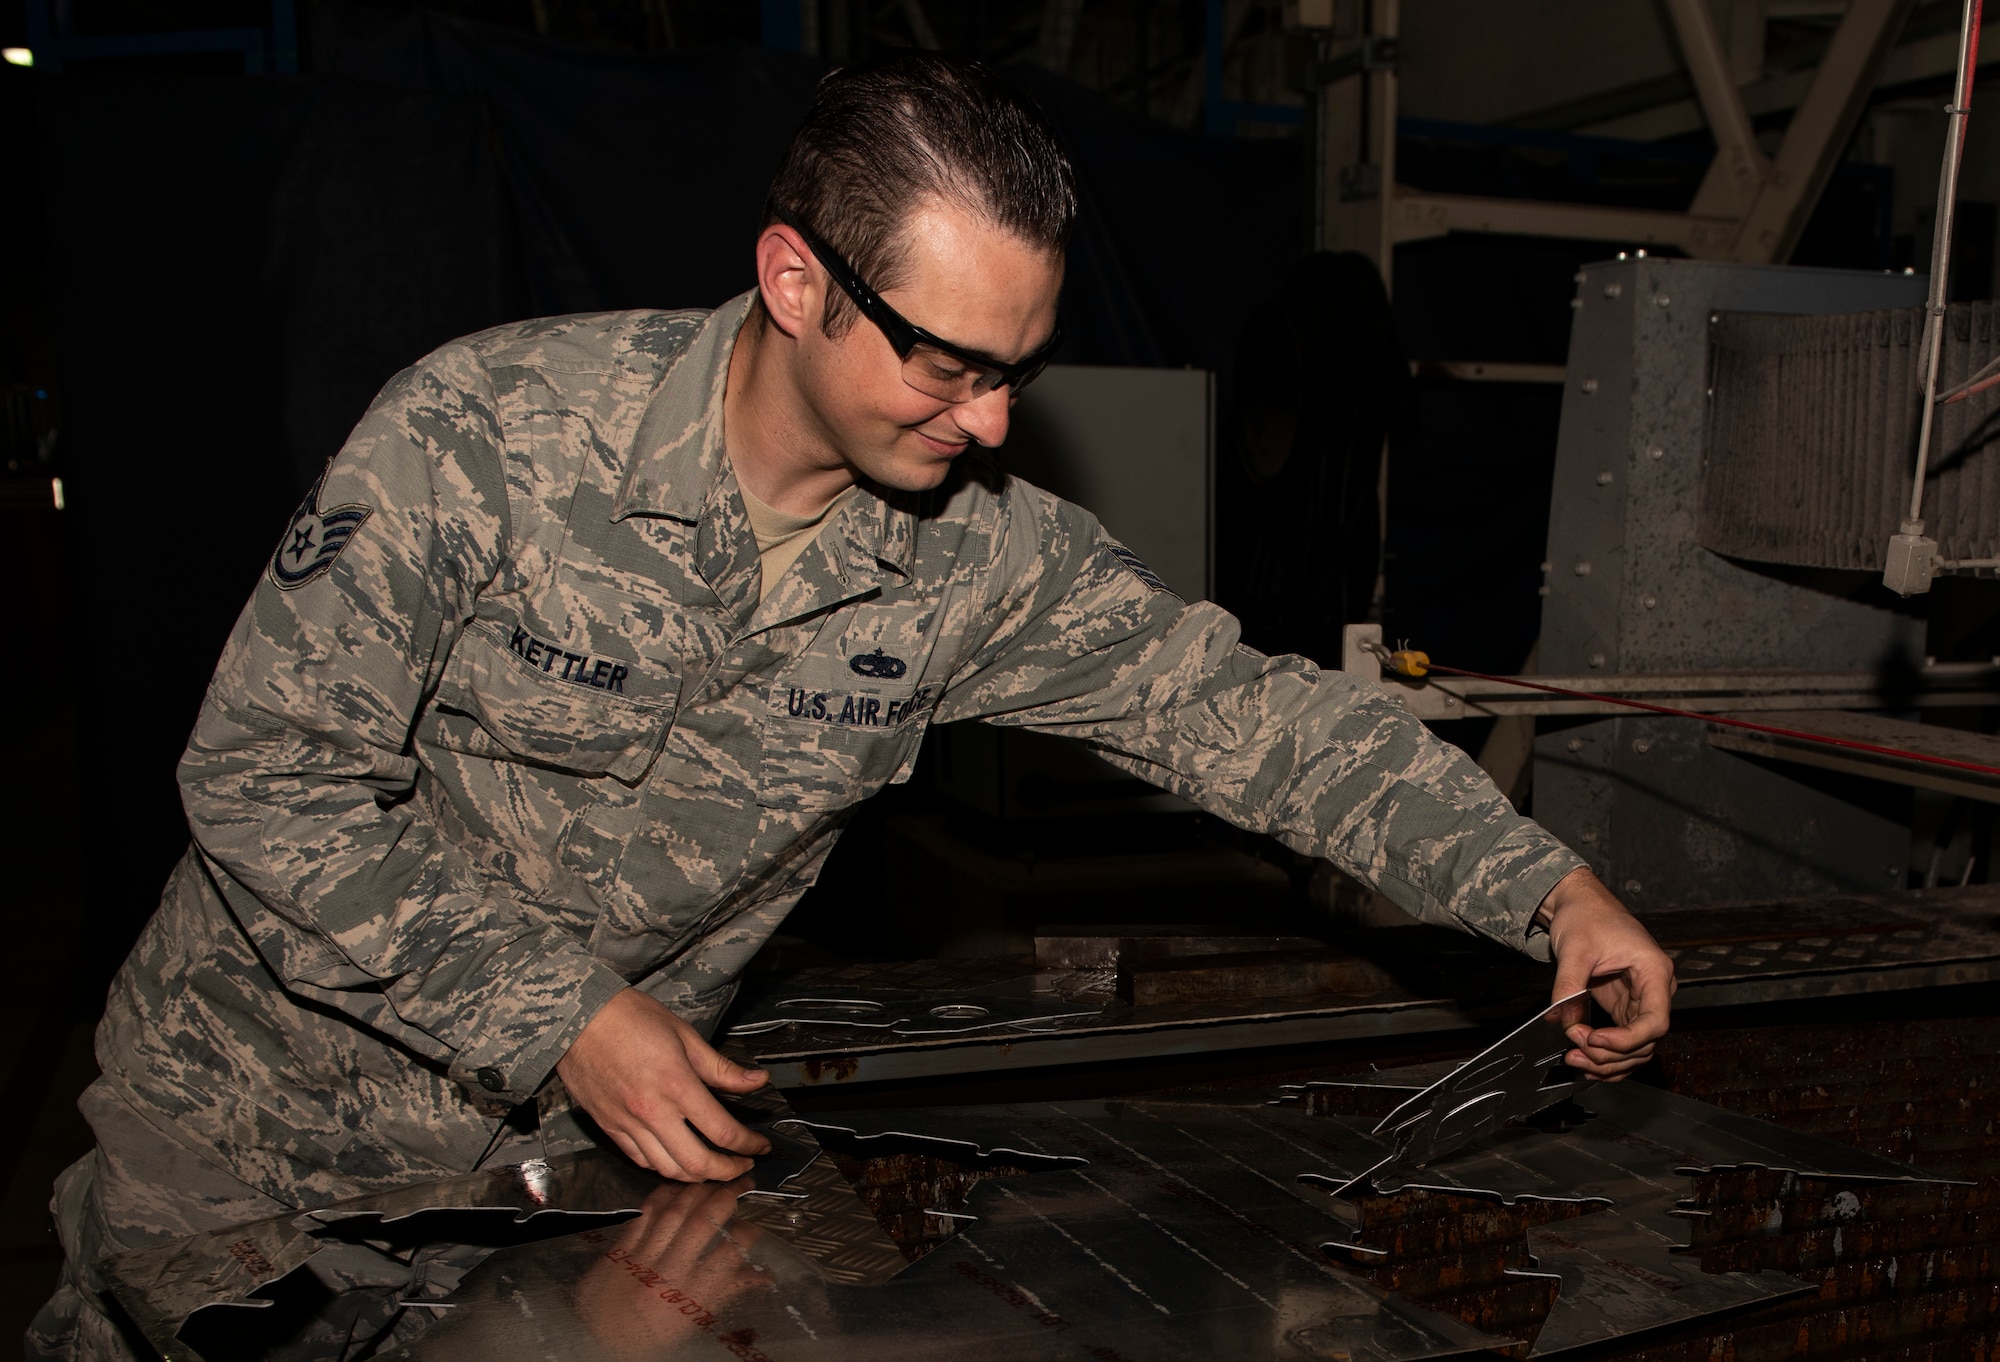 U.S. Air Force Staff Sgt. Derek Kettler, 48th Equipment Maintenance Squadron Fabrication Flight, removes an aircraft bracket from a sheet of aluminum at Royal Air Force Lakenheath, England, Sept. 15, 2020. The Fabrication Flight maintains the structural integrity of aircraft using specialized tools and equipment to repair damage and fabricate replacement parts, ensuring the 48th Fighter Wing remains a ready and capable force. (U.S. Air Force photo by Airman 1st Class Jessi Monte)